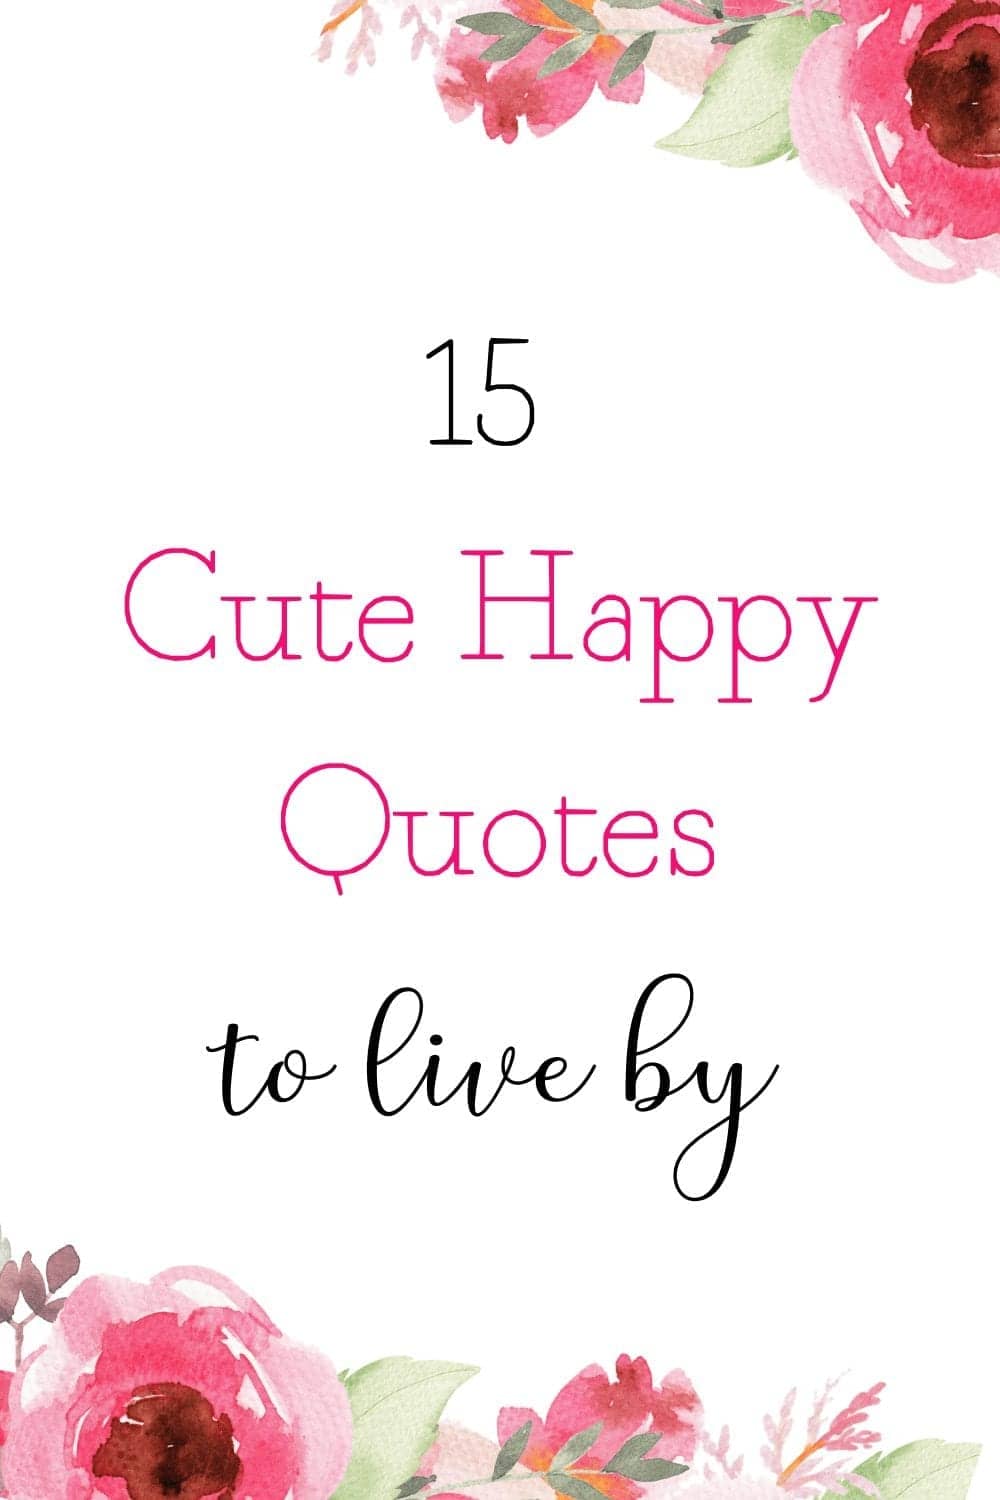 Cute happy quotes plus free printable quotes PDF download list